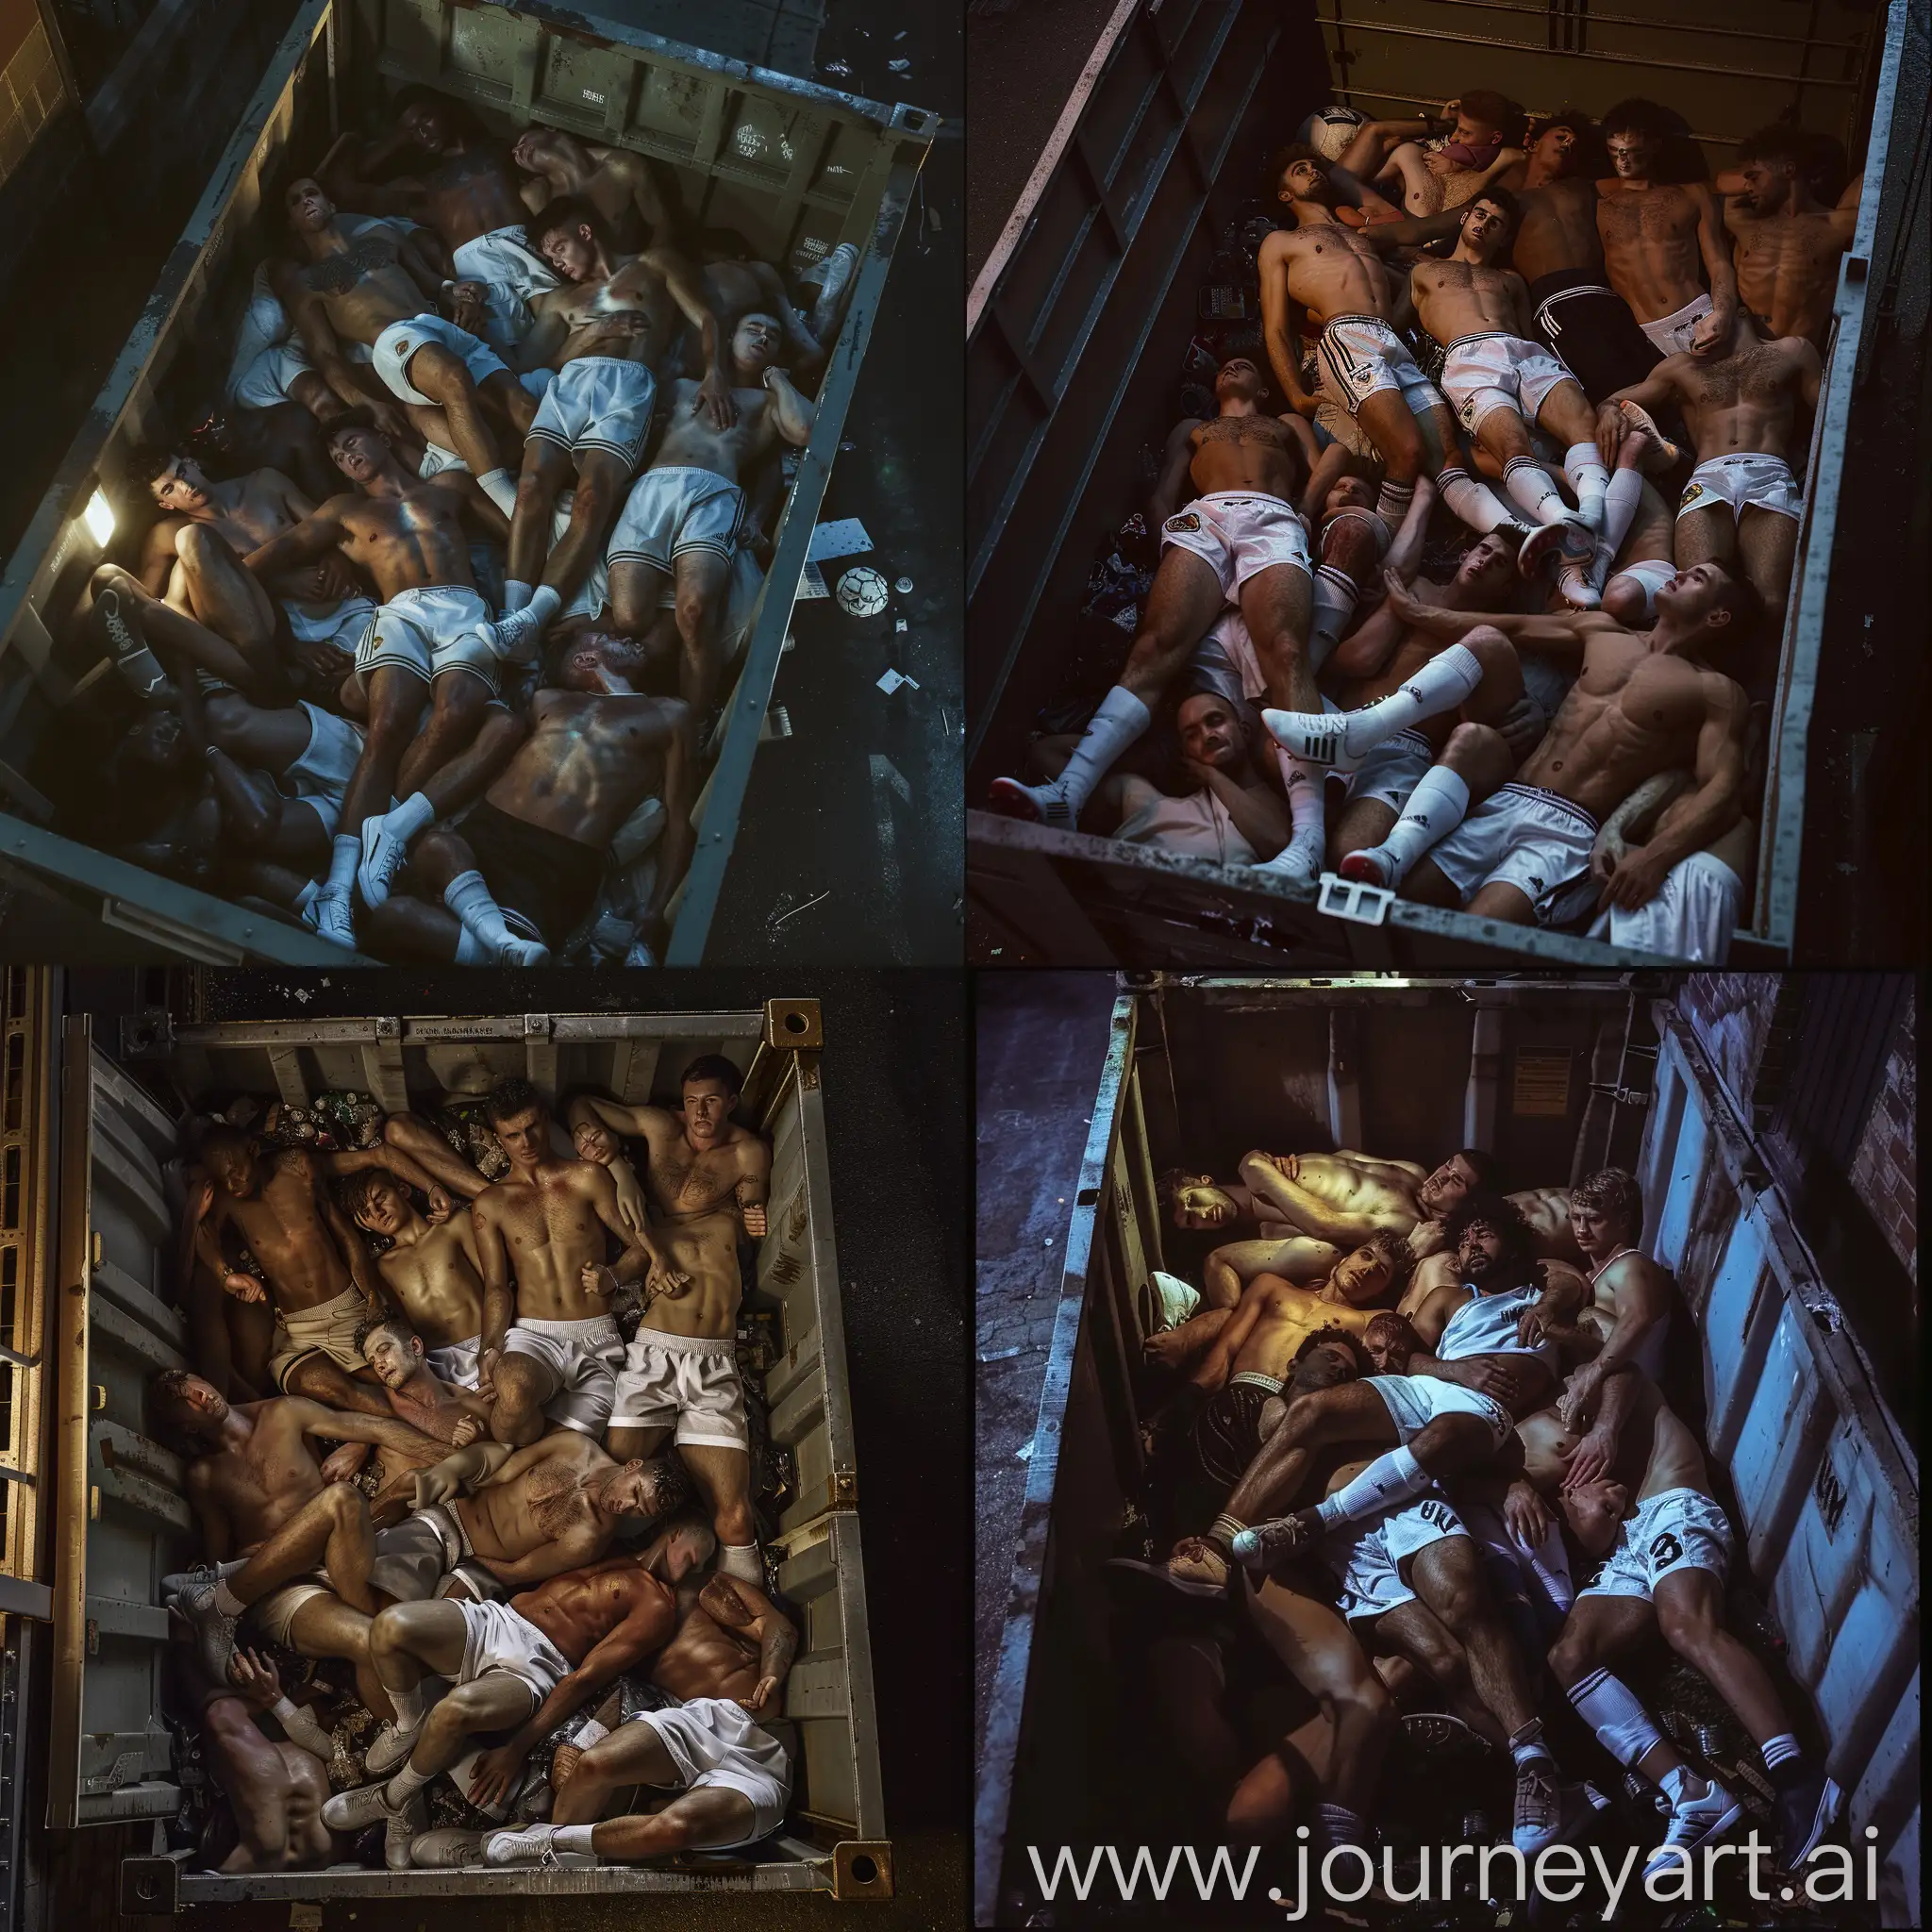 Cinematic lighting, realistic, view from above, close up view of piles of handsome soccer players lying inside a dumpster, good looking fit shirtless male young soccer players wearing soccer shorts ans white socks, bodies lying one above another, handsome football players from different ethnicities and different skin colors, all lying inside a dumpster, sleeping inside a trash dumpster, alley background at night, all wearinng sneakers and white socks